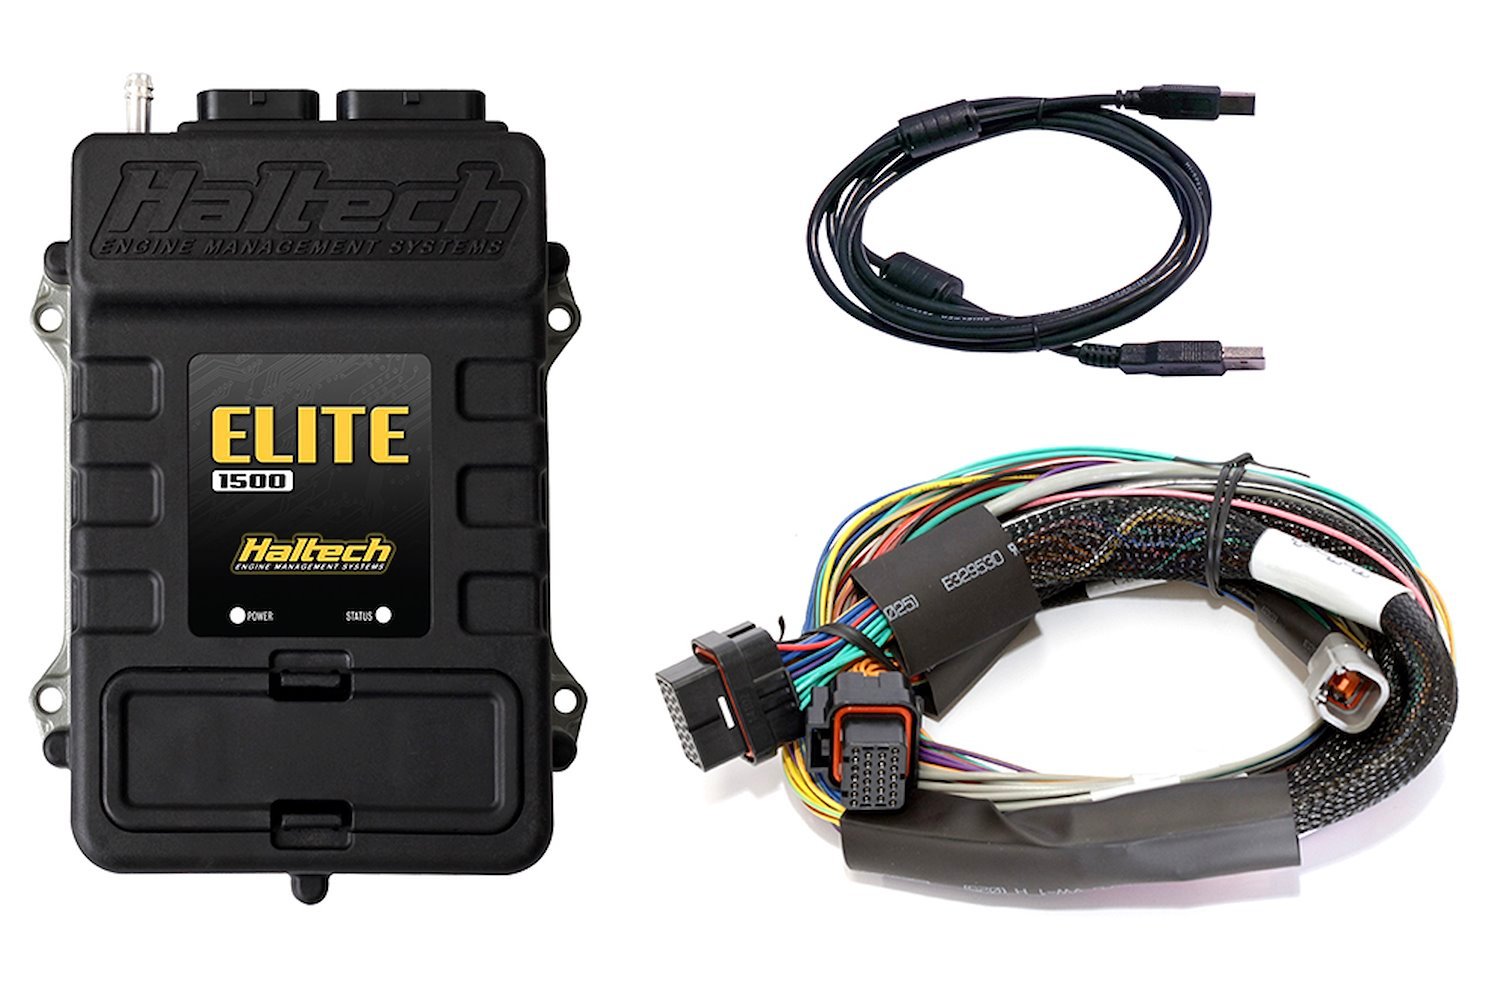 HT-150902 Elite 1500 + Basic Universal Wire-in Harness Kit, 2.5m (8')